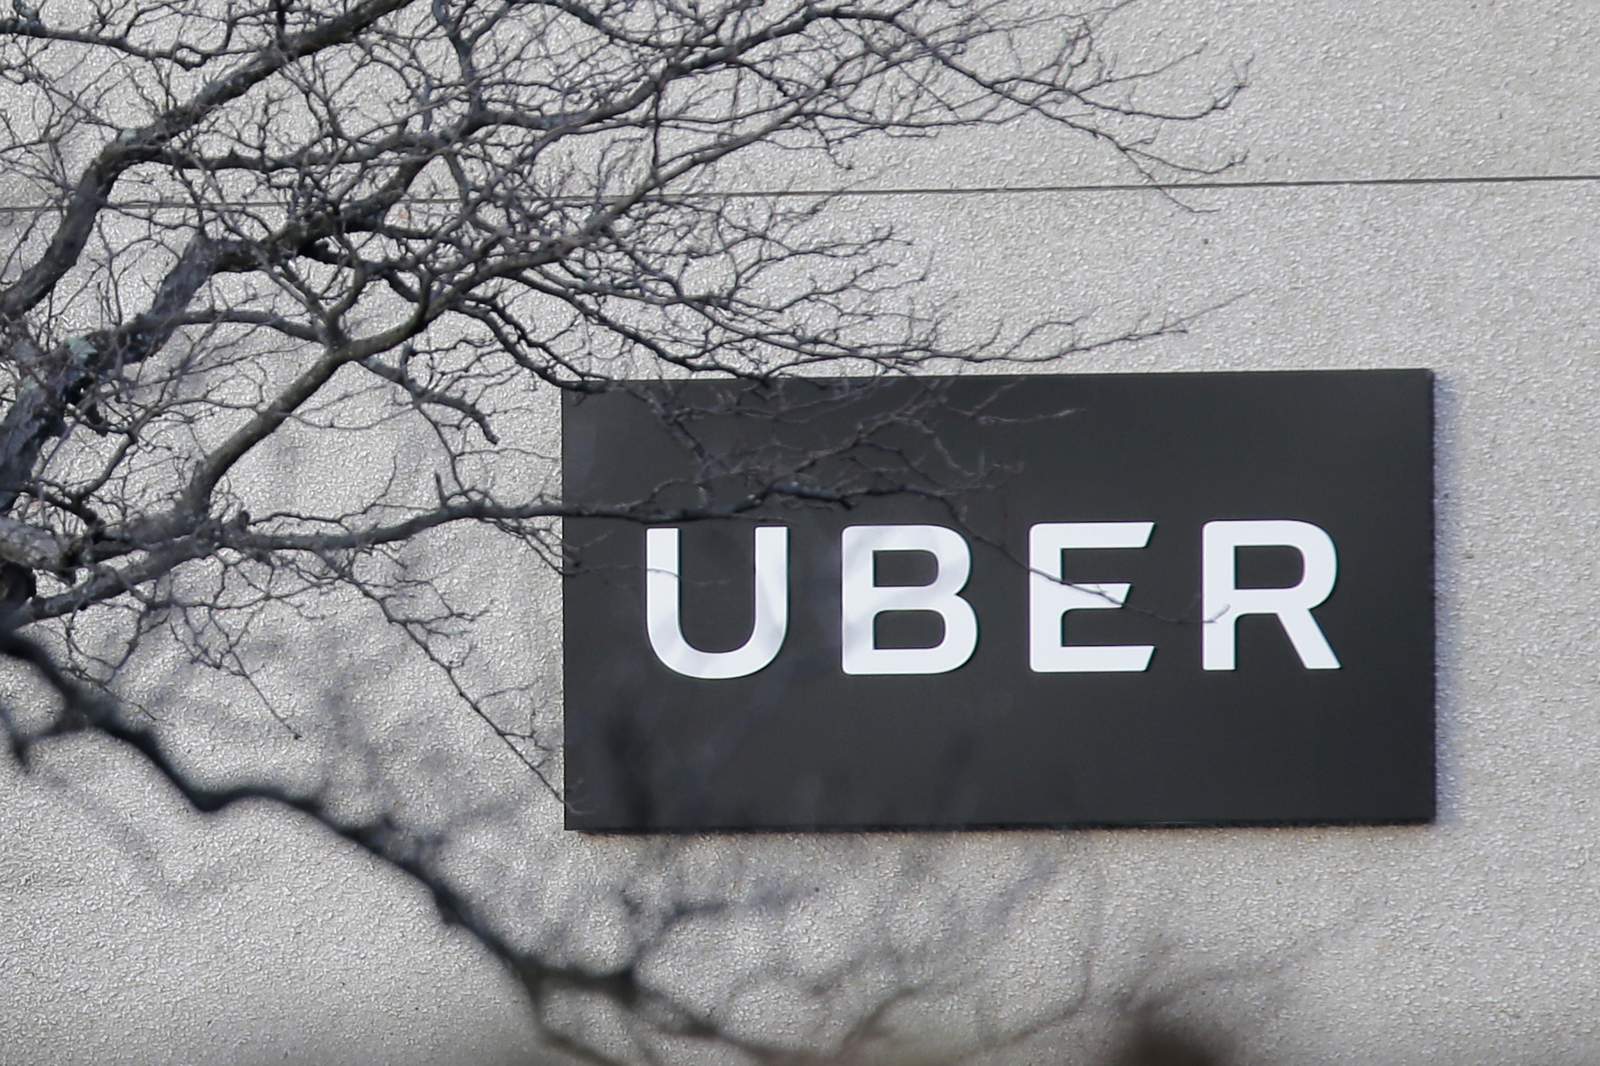 There will be new changes coming to your next Uber ride